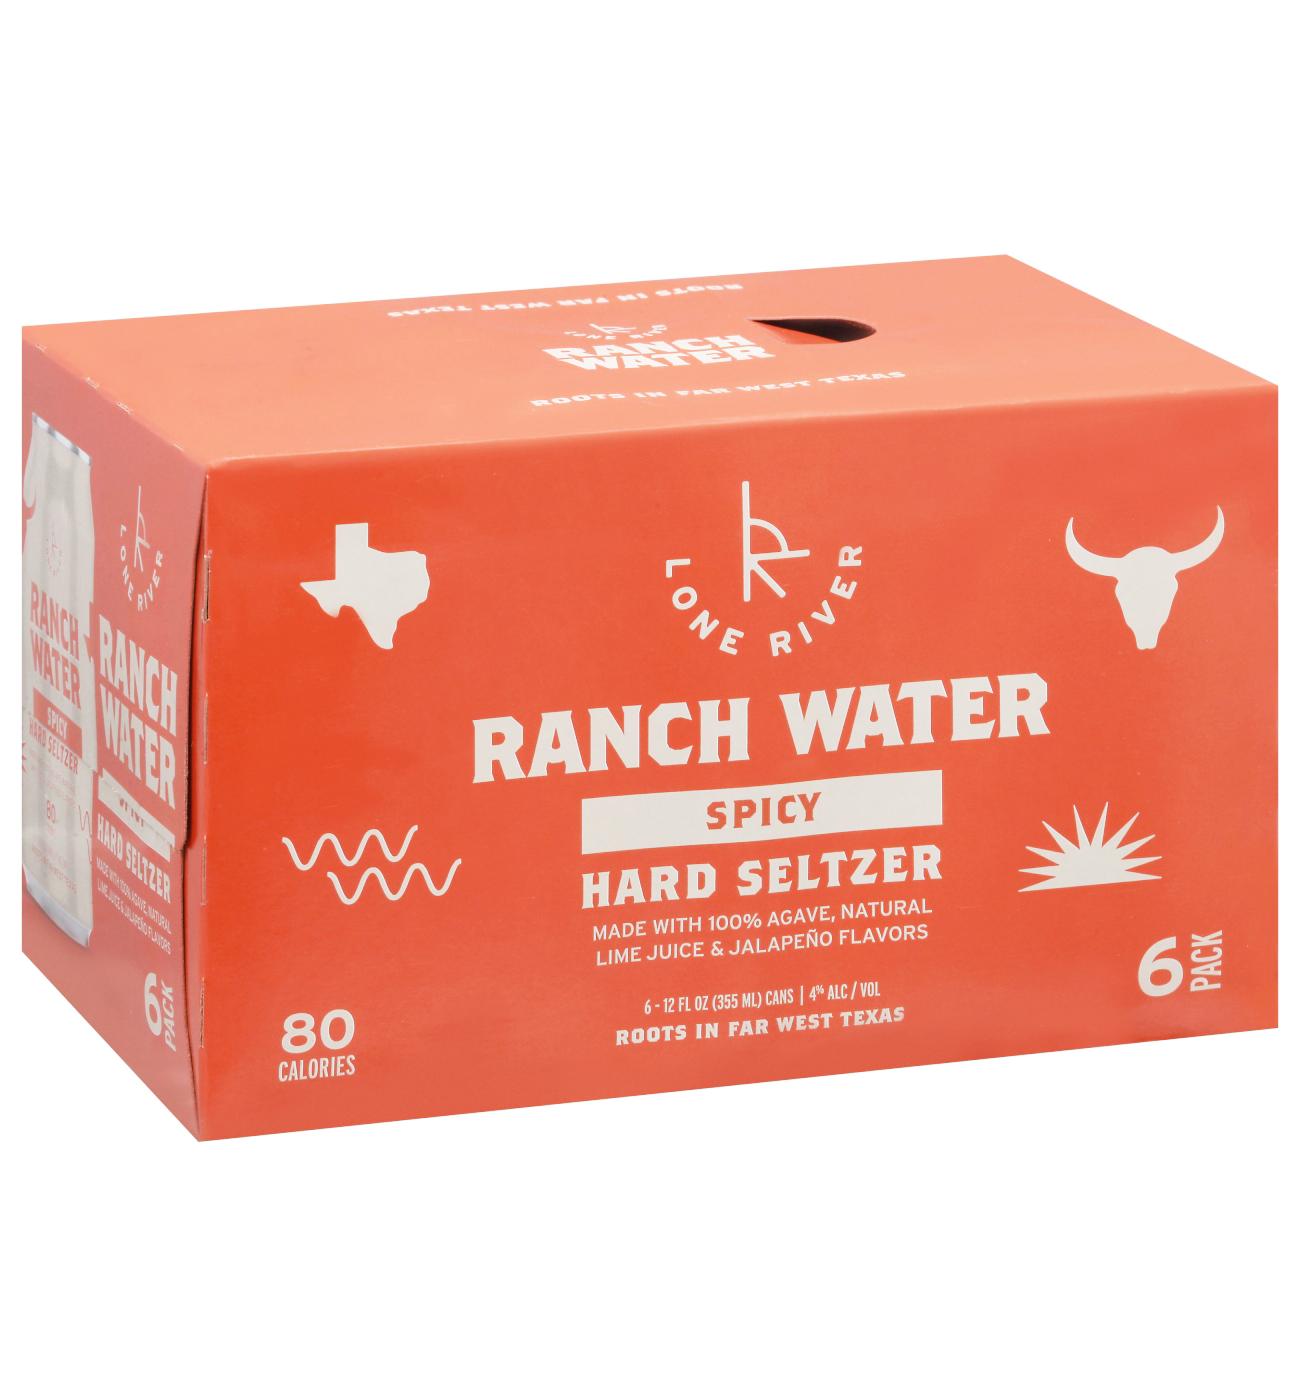 Lone River Ranch Water Spicy Hard Seltzer 12 oz Cans; image 1 of 3